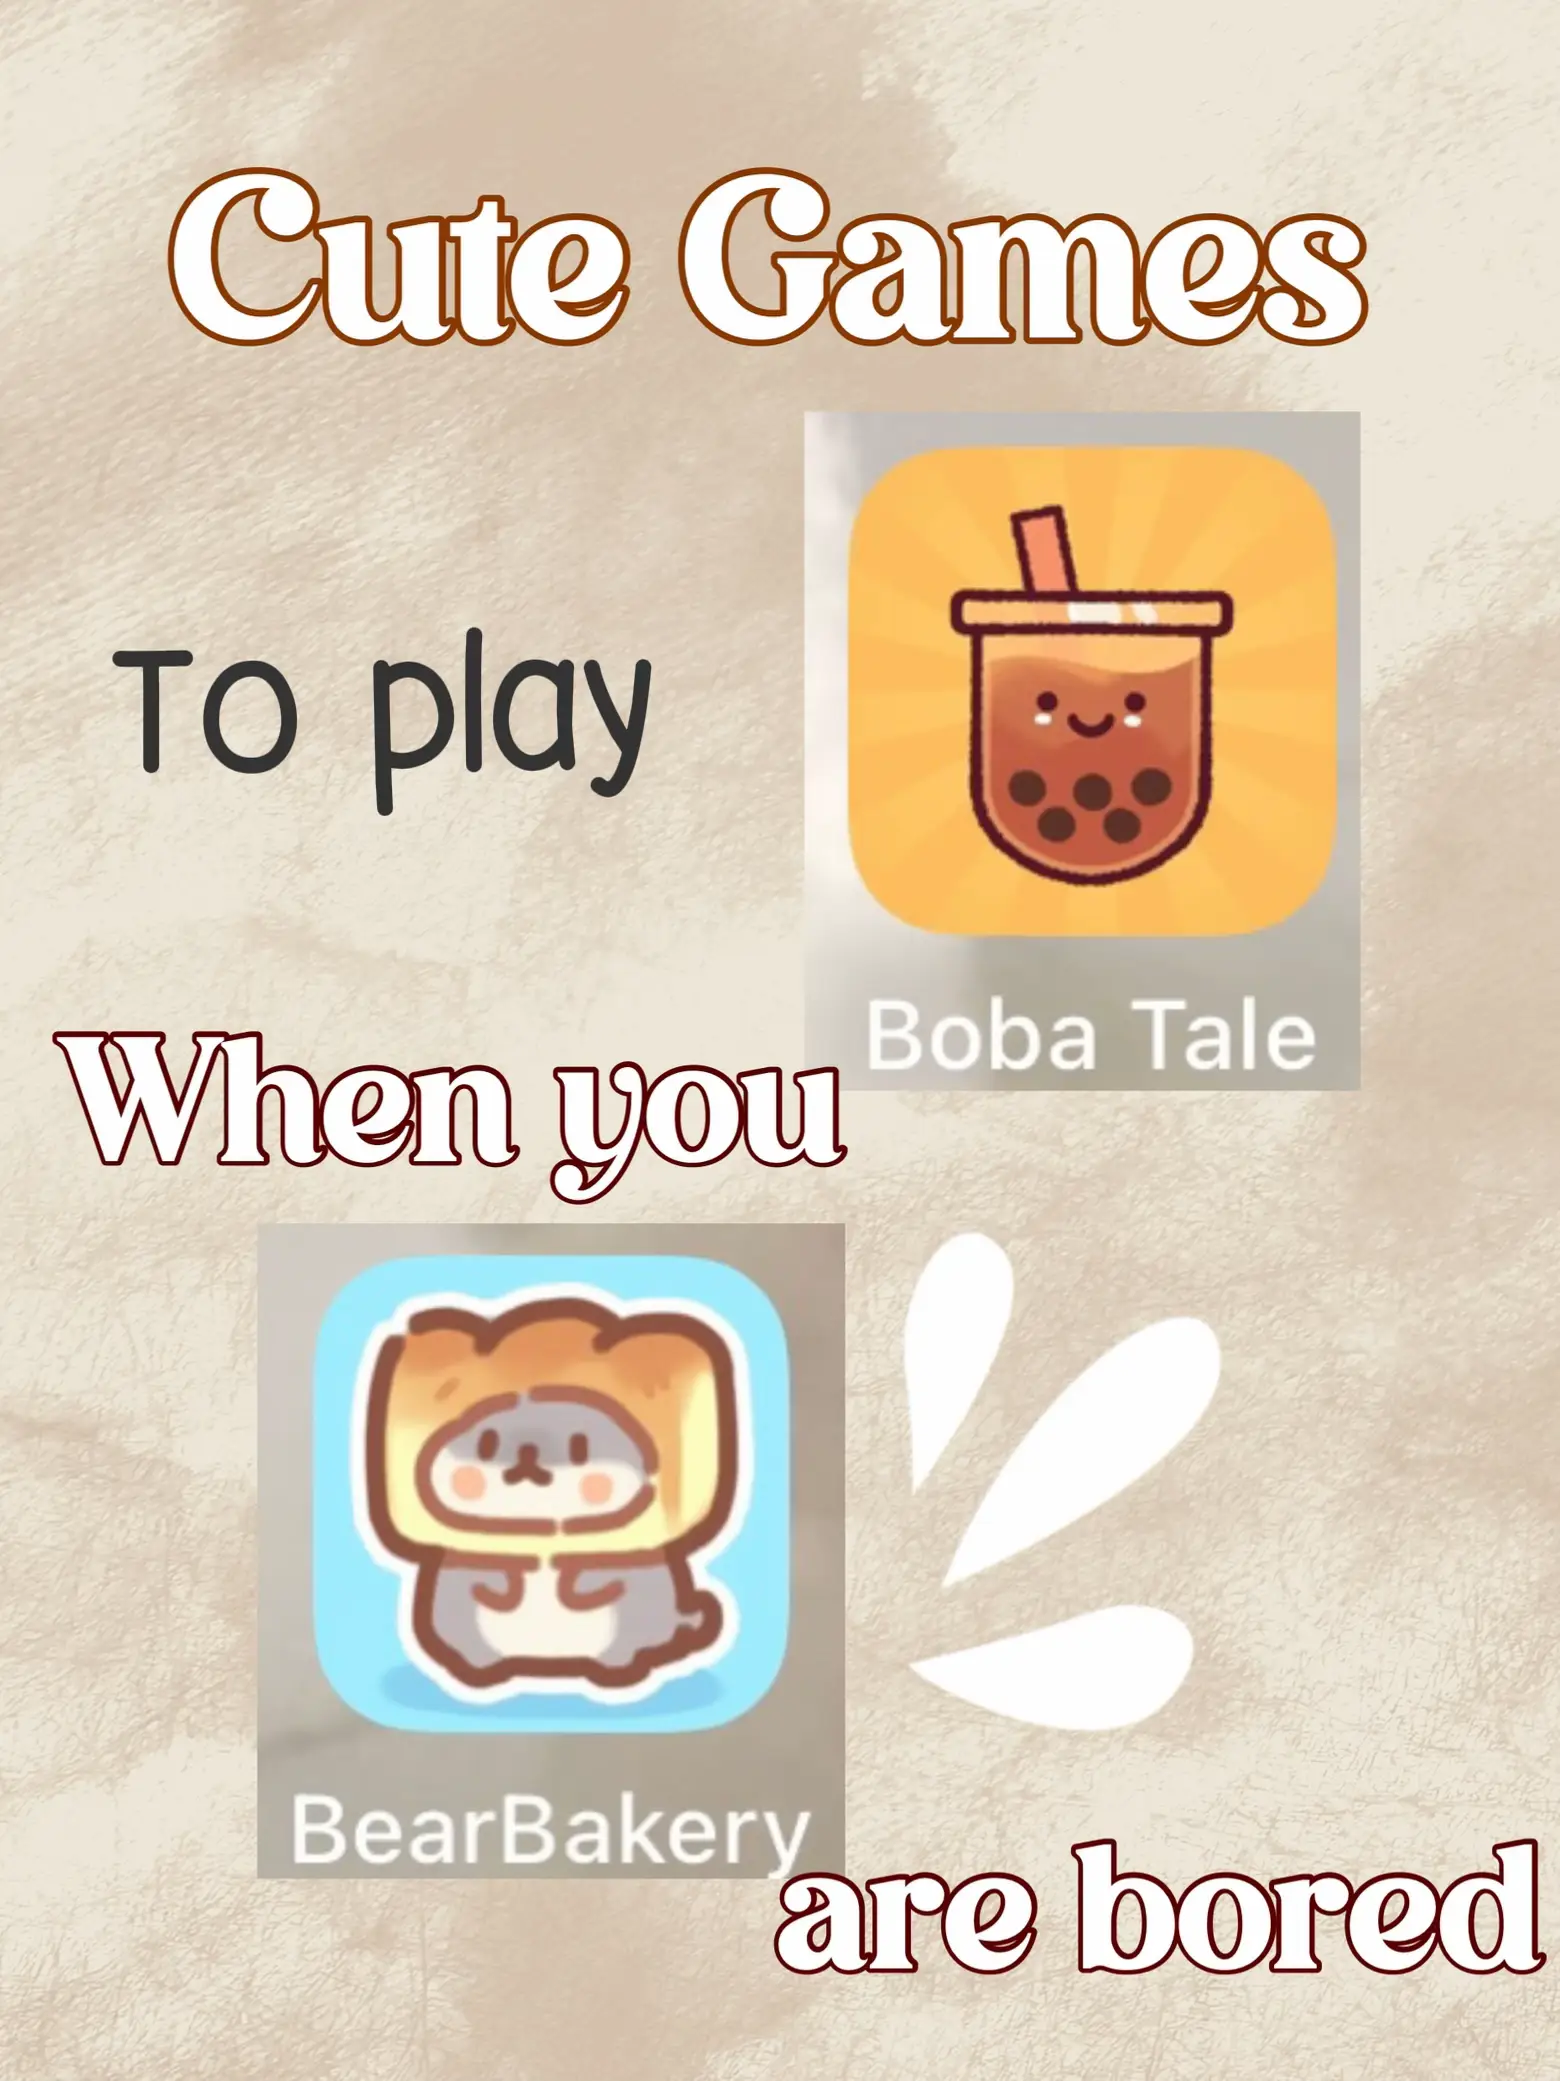 aesthetic and fun games to play when you are bored ☁ cute & comfy games 🧸  